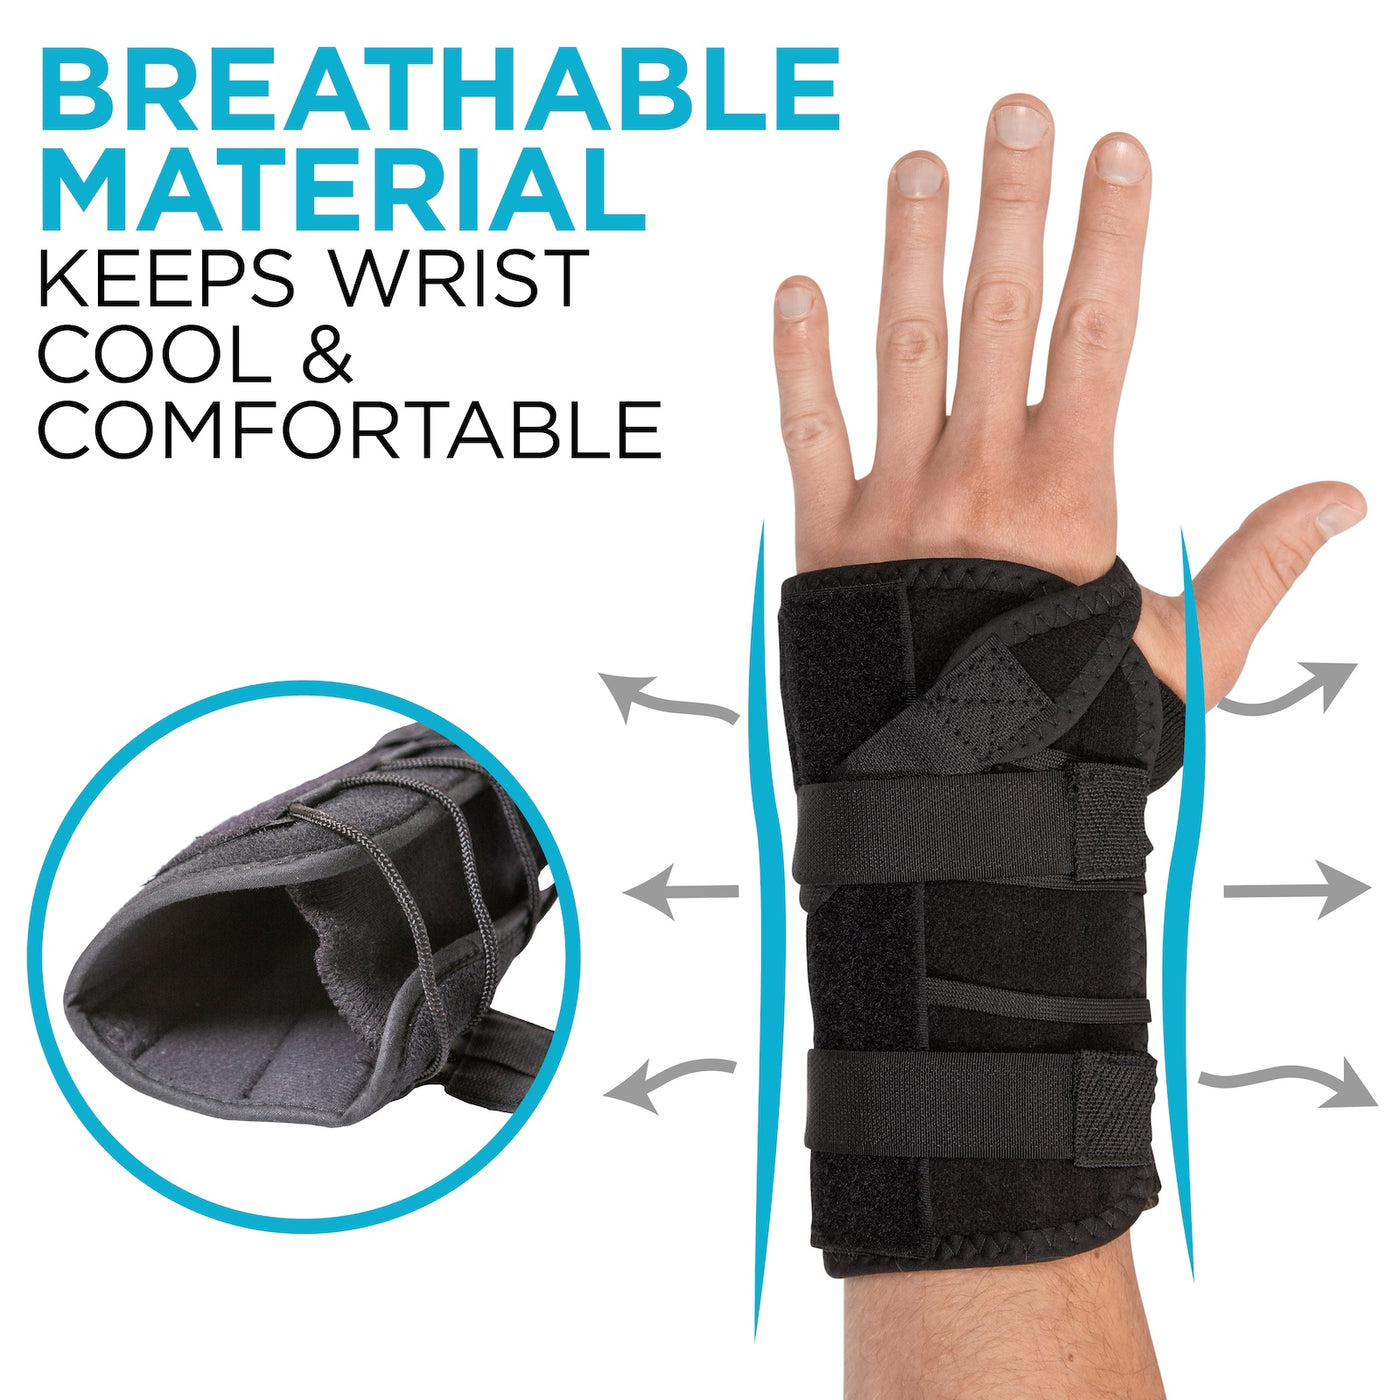 Our carpal tunnel rsi video game support is made with a breathable material that keeps you cool while gaming